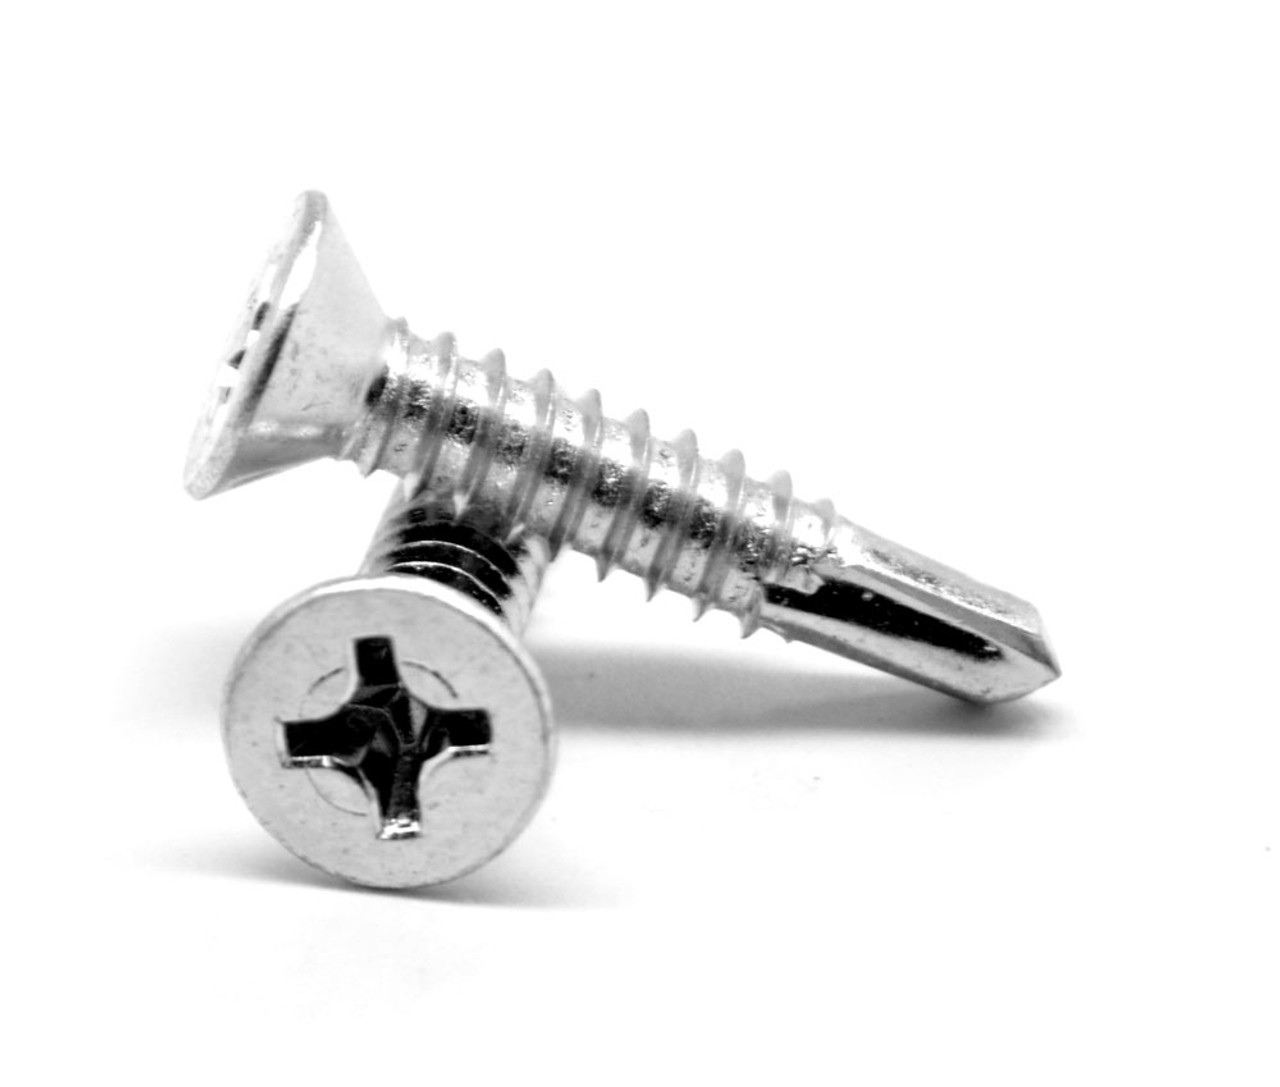 #8-18 x 1 1/4" (FT) Self Drilling Screw Phillips Flat #6 Head #2 Point Low Carbon Steel Zinc Plated